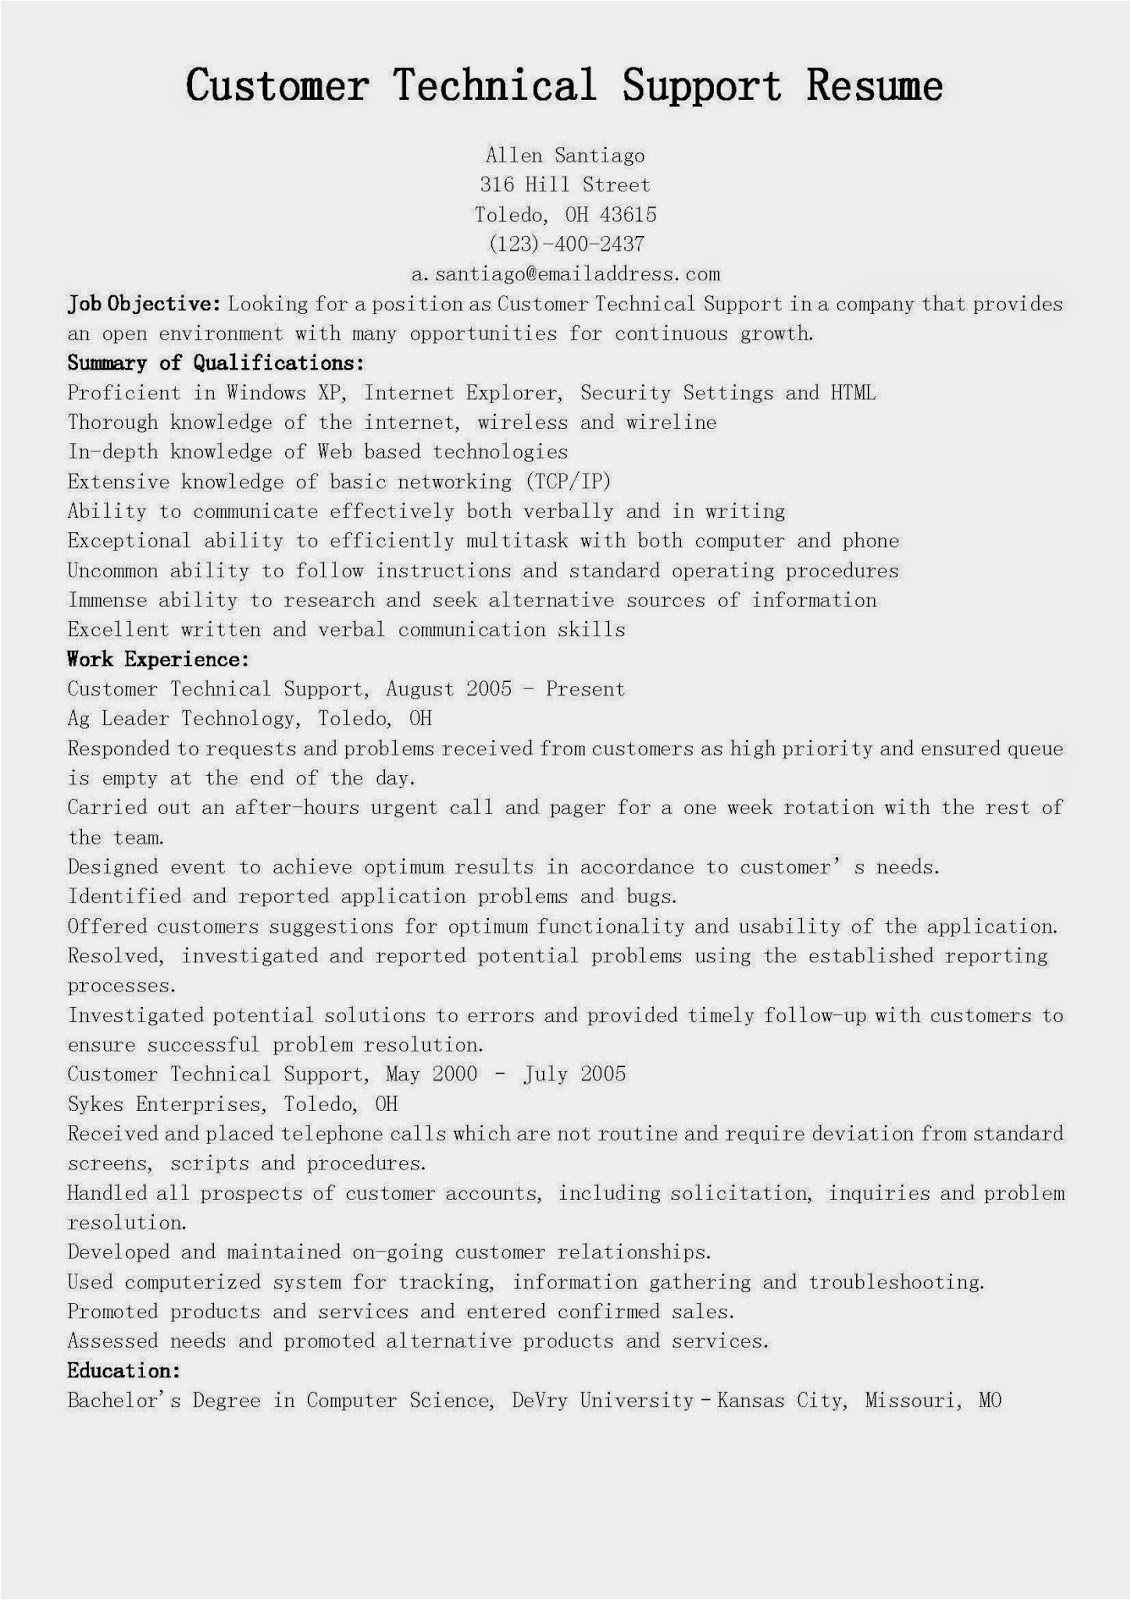 Customer Service Technical Support Sample Resume Resume Samples Customer Technical Support Resume Sample